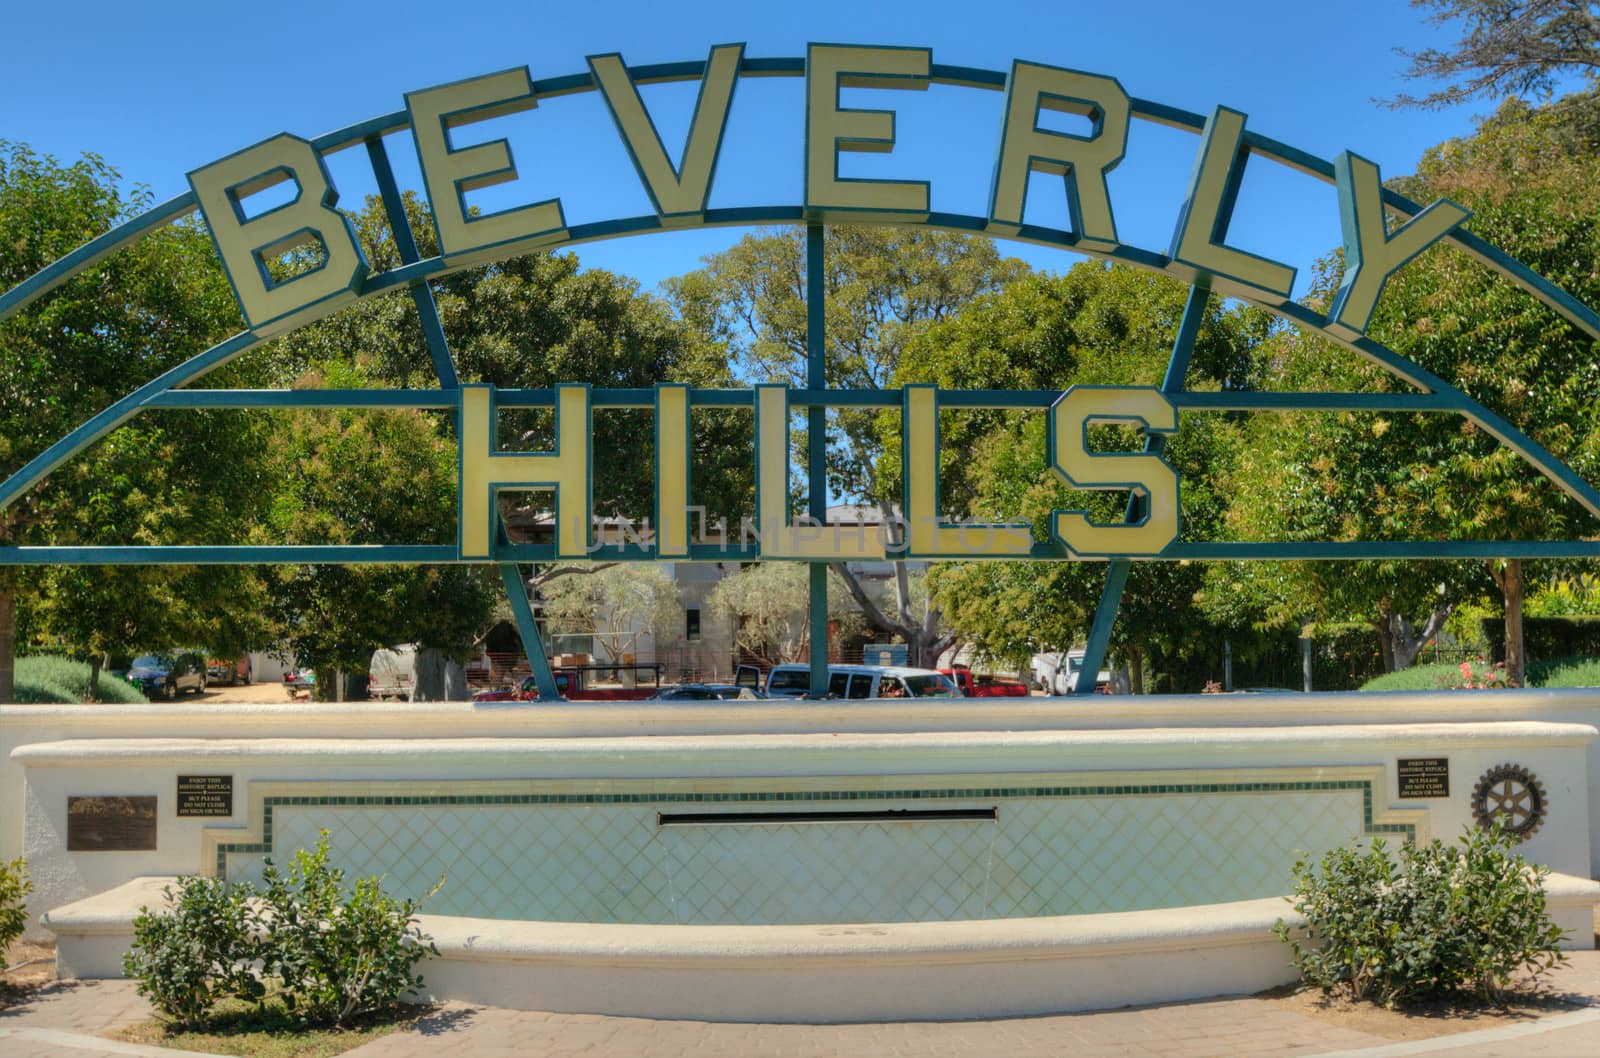 Beverly Hills sign on rodeo drive view into the Los Angeles hills